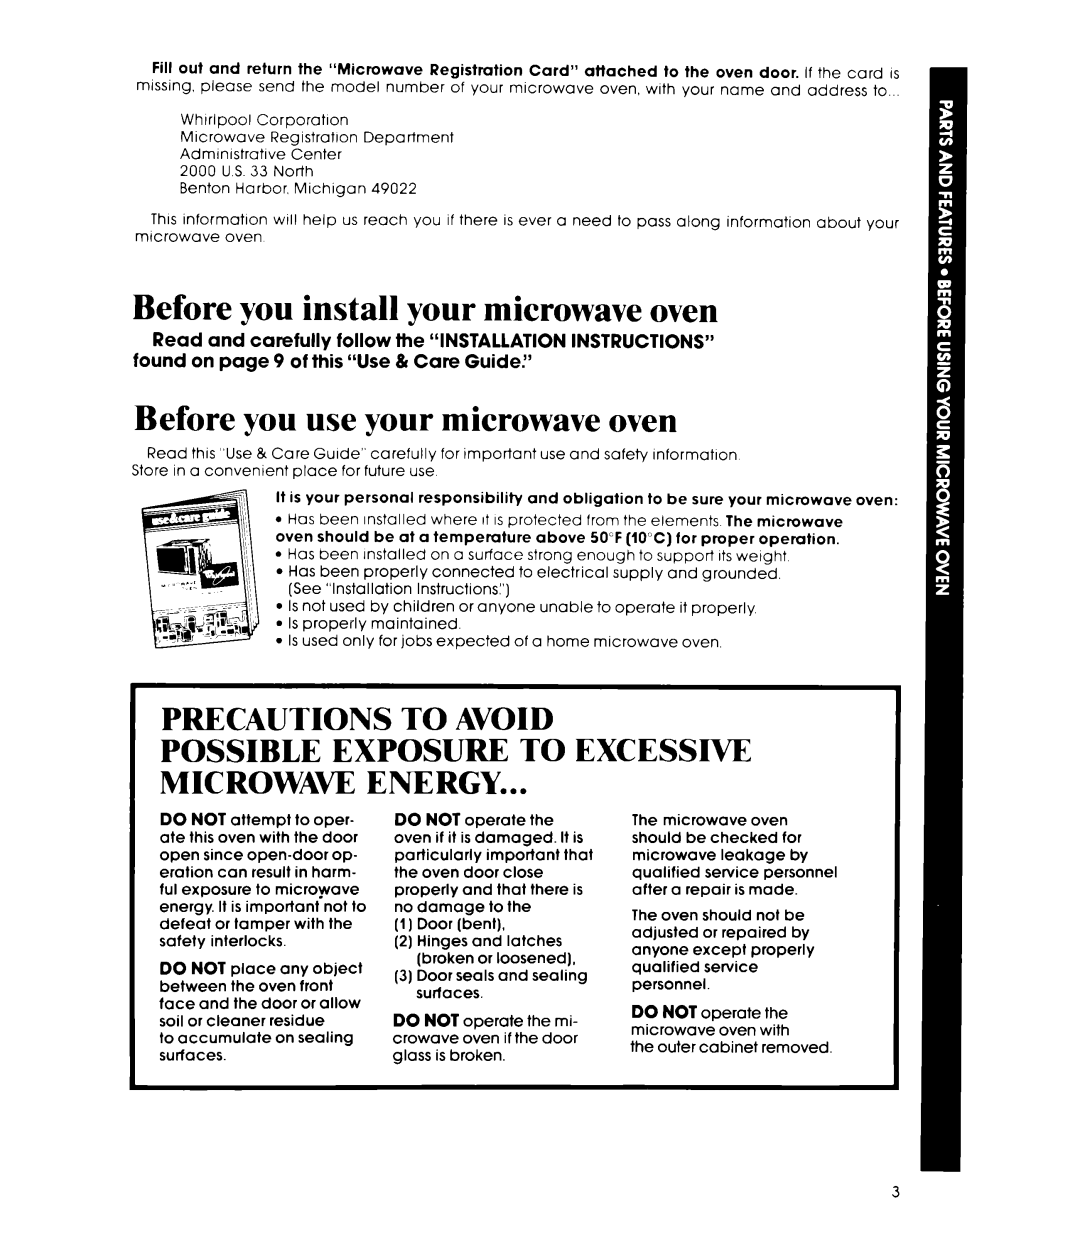 Whirlpool MW81OOXP manual Before you install your microwave oven, Before you use your microwave oven, Precautions To Avoid 